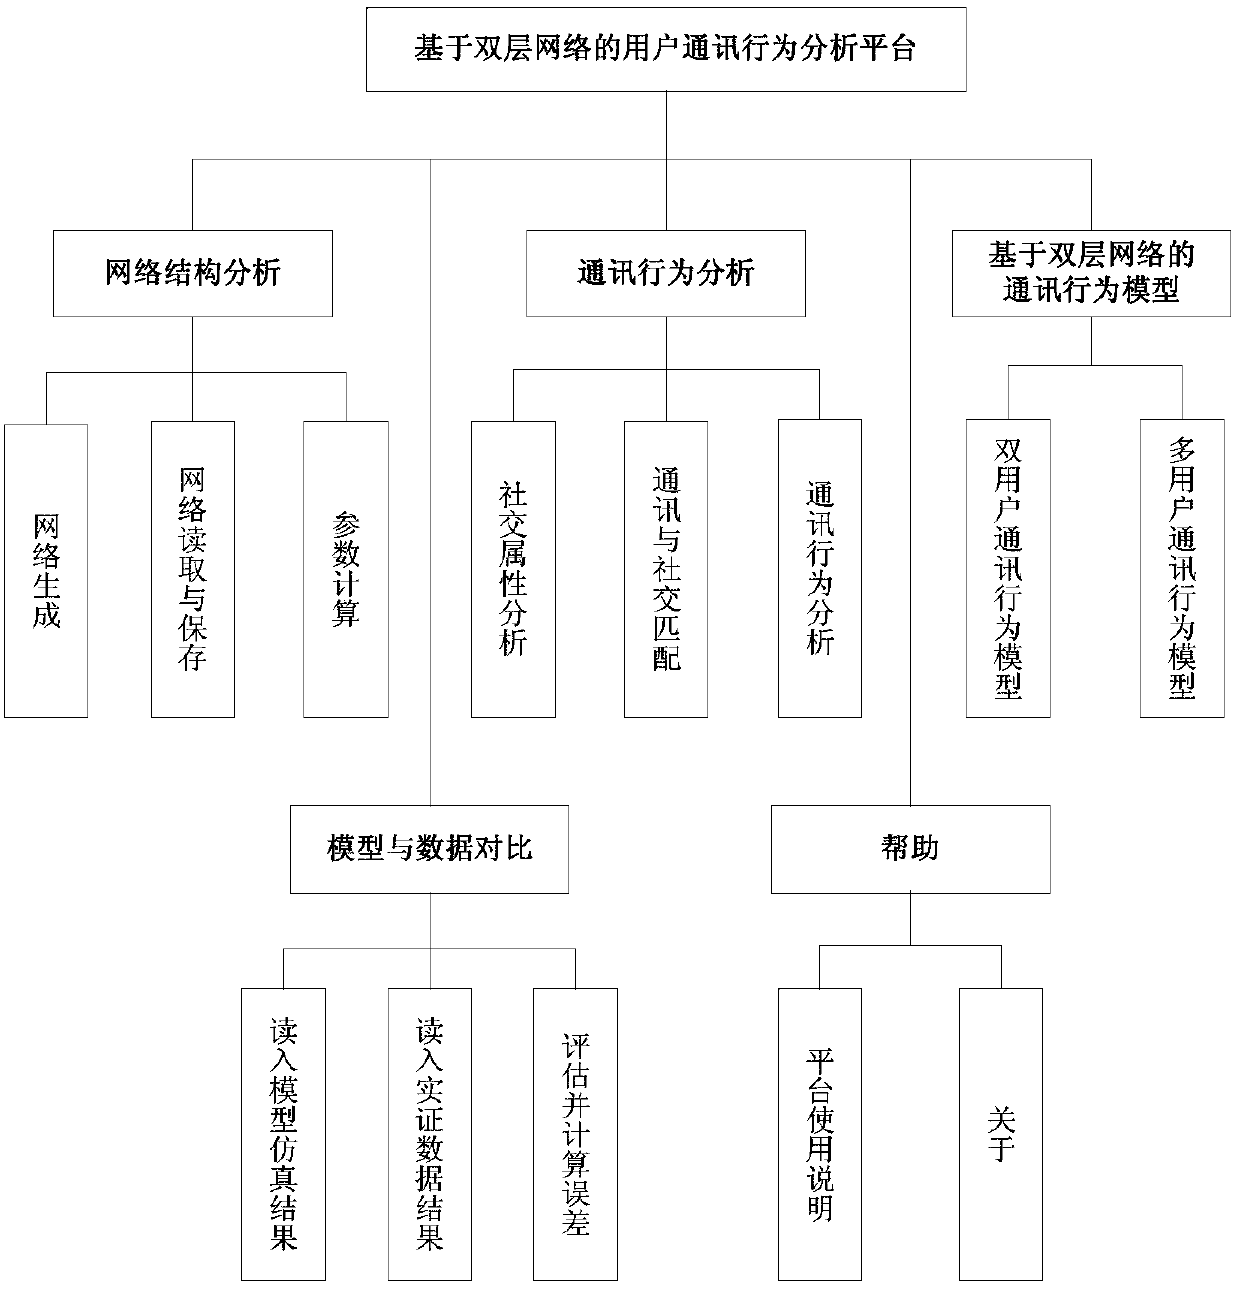 User communication behavior analysis and model simulation system based on double-layer network